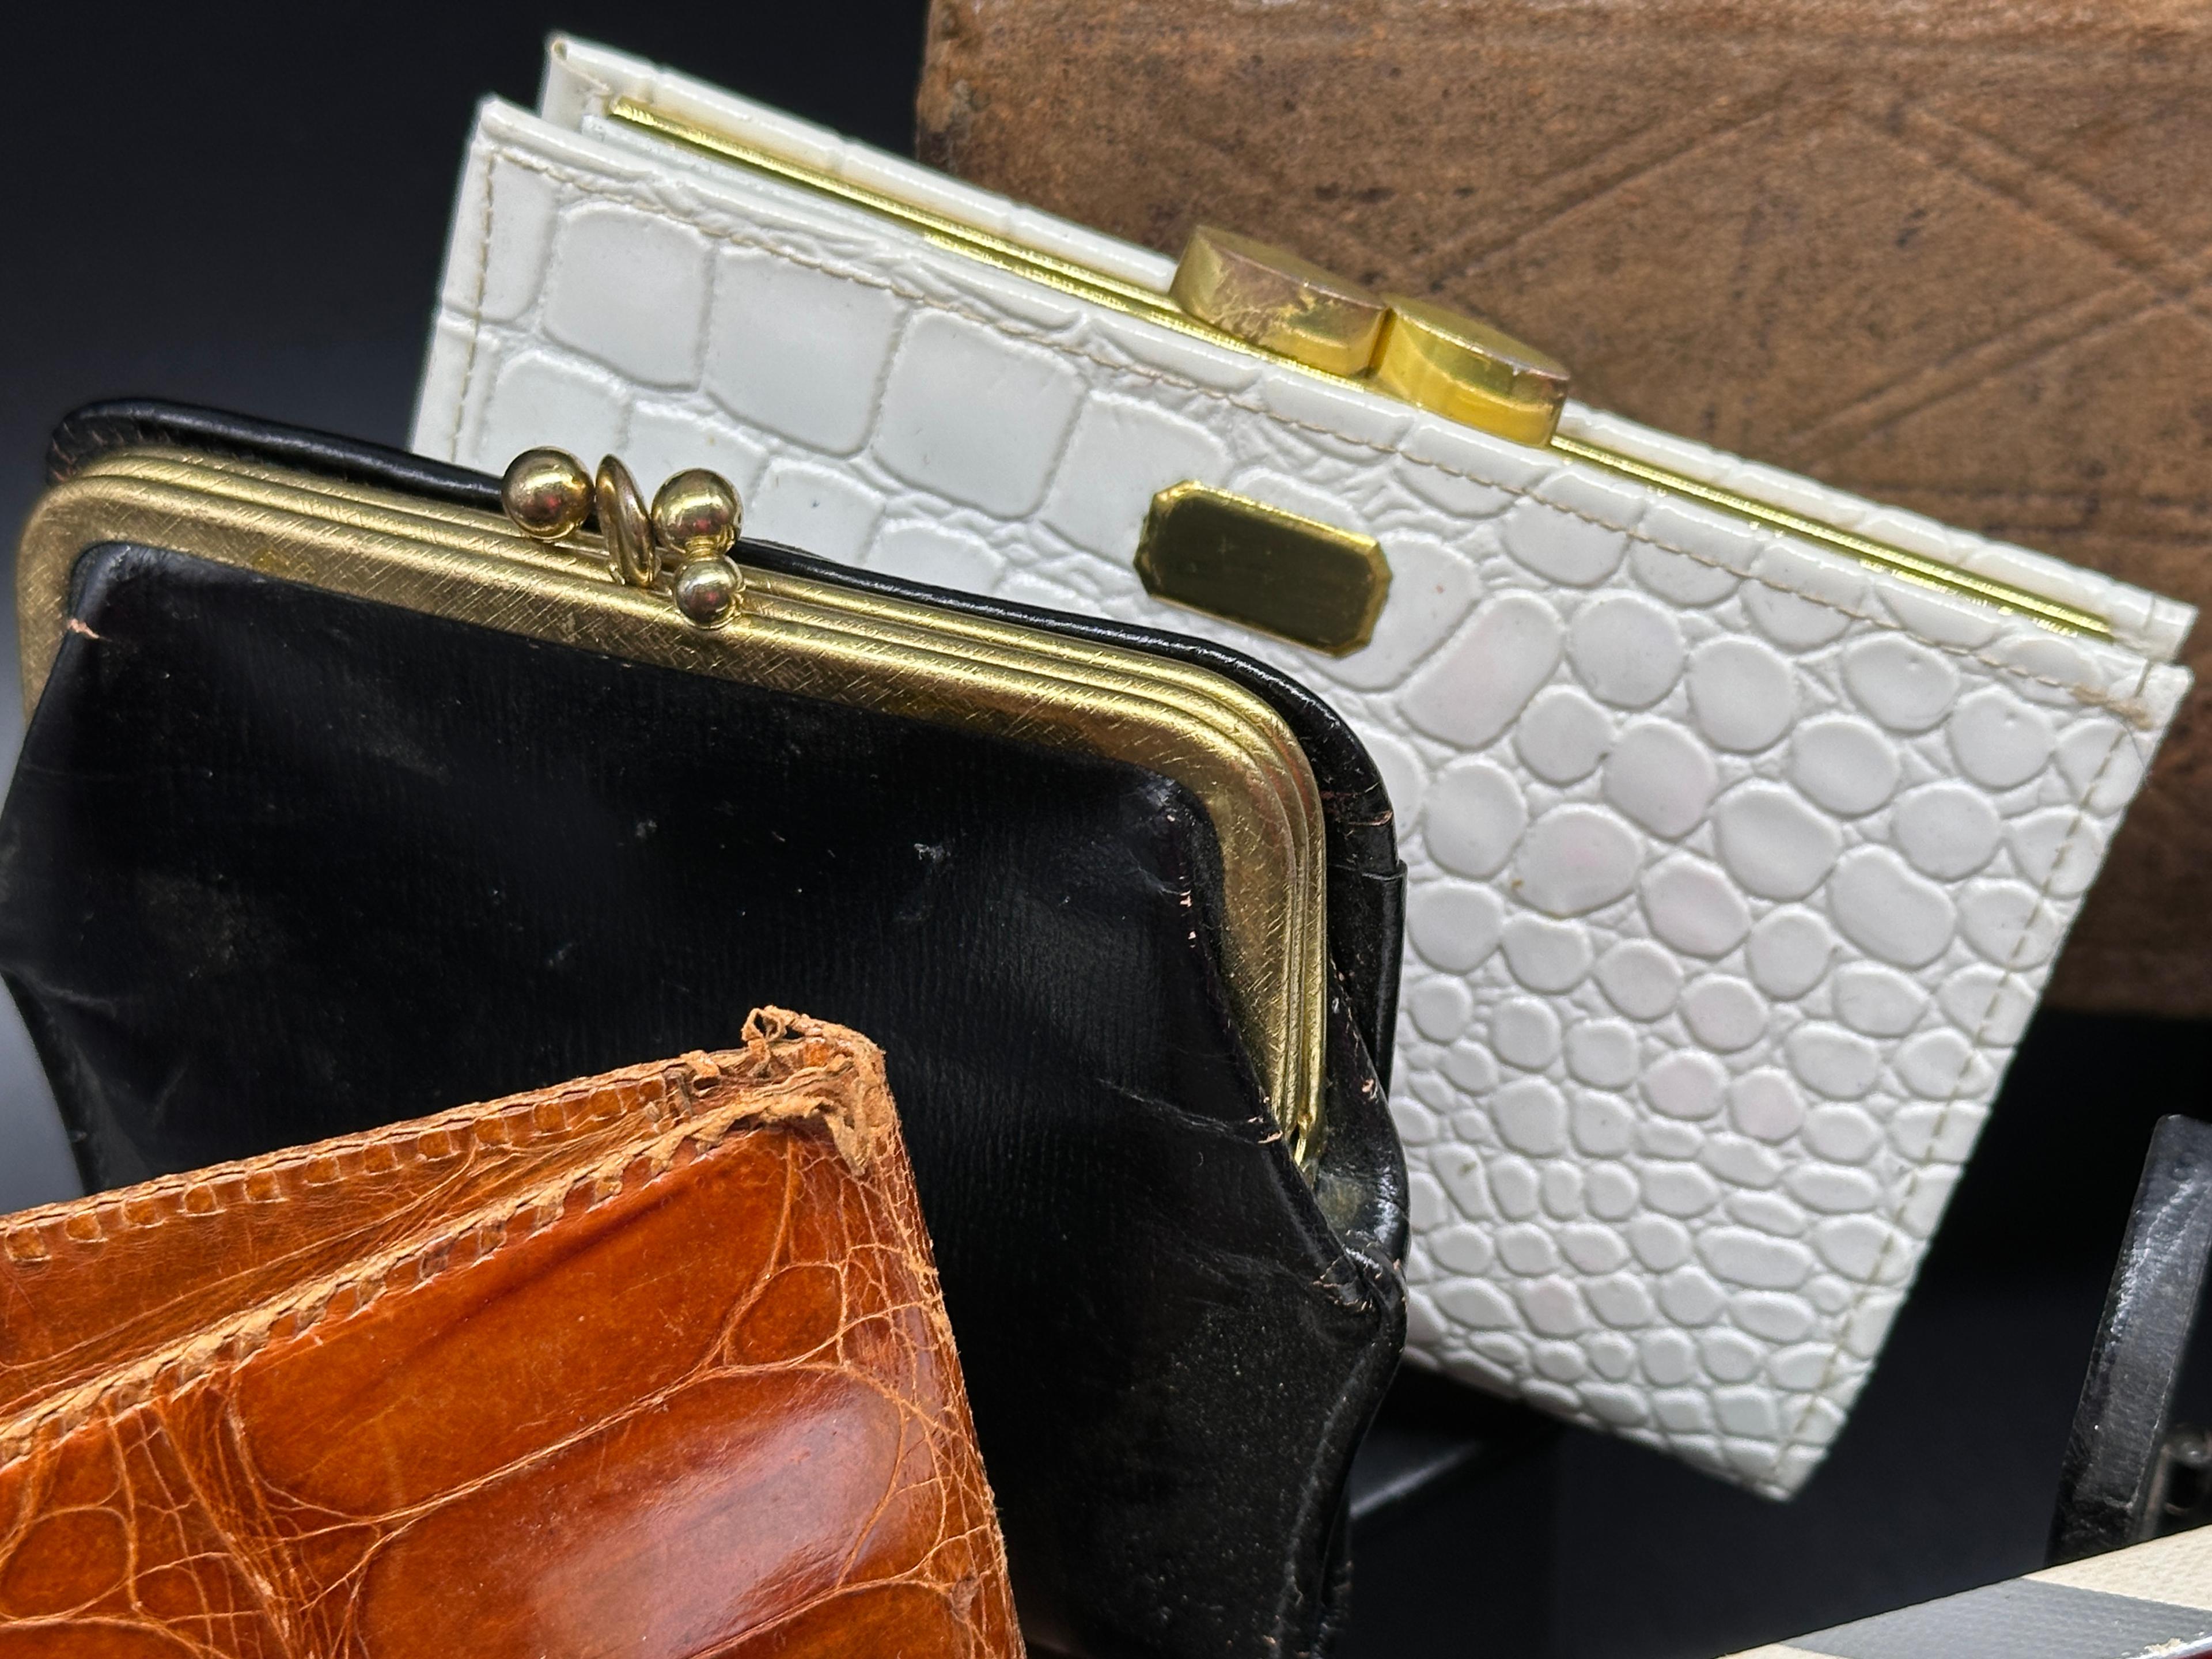 Variety of Vintage Wallets, Coin Purses and Eye Glass Cases